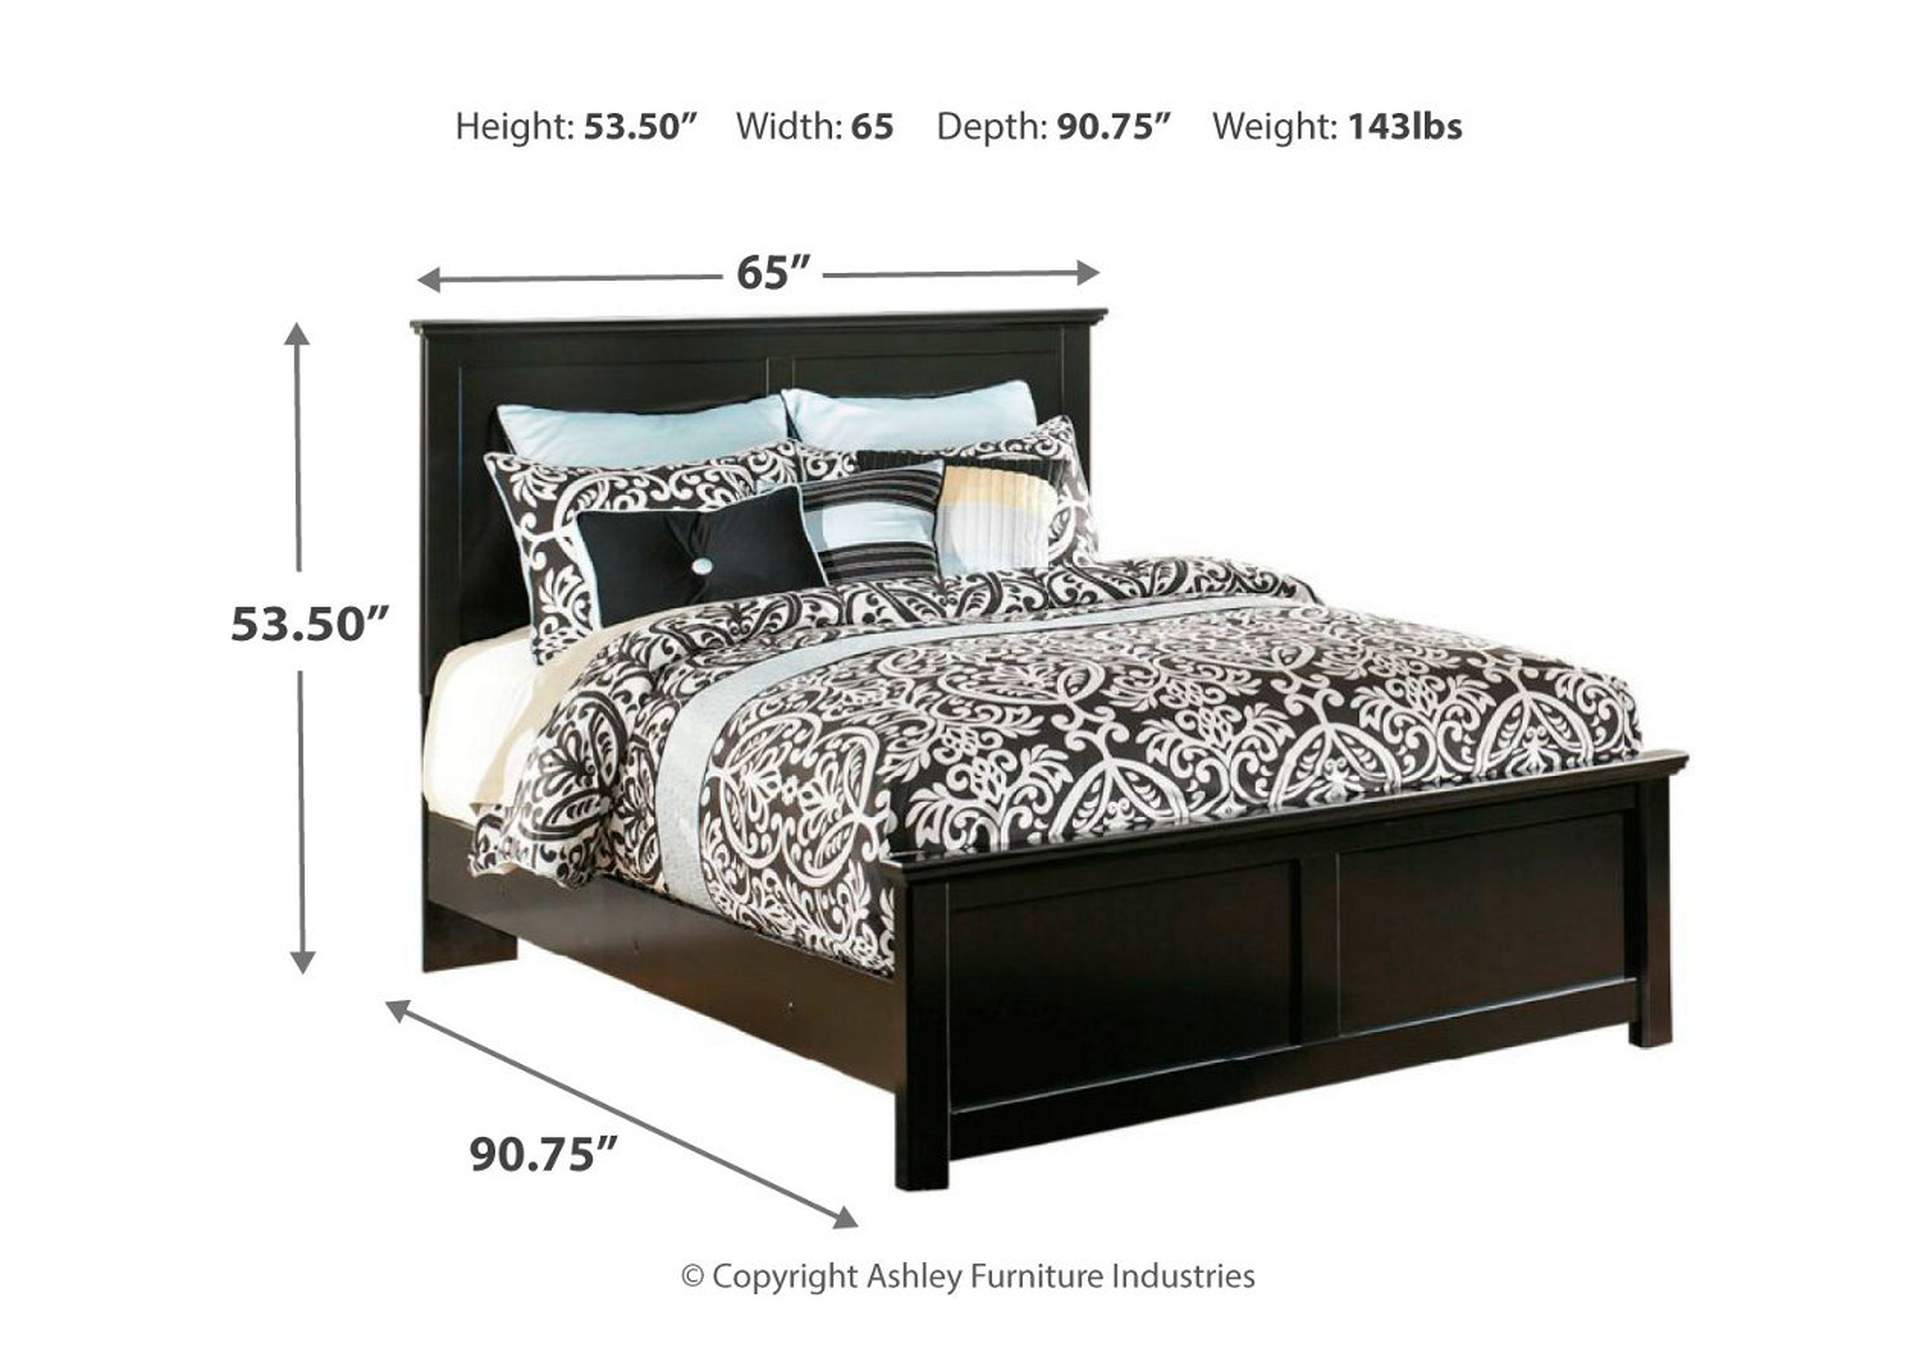 Maribel Queen Panel Bed, Dresser, Chest and Nightstand,Signature Design By Ashley